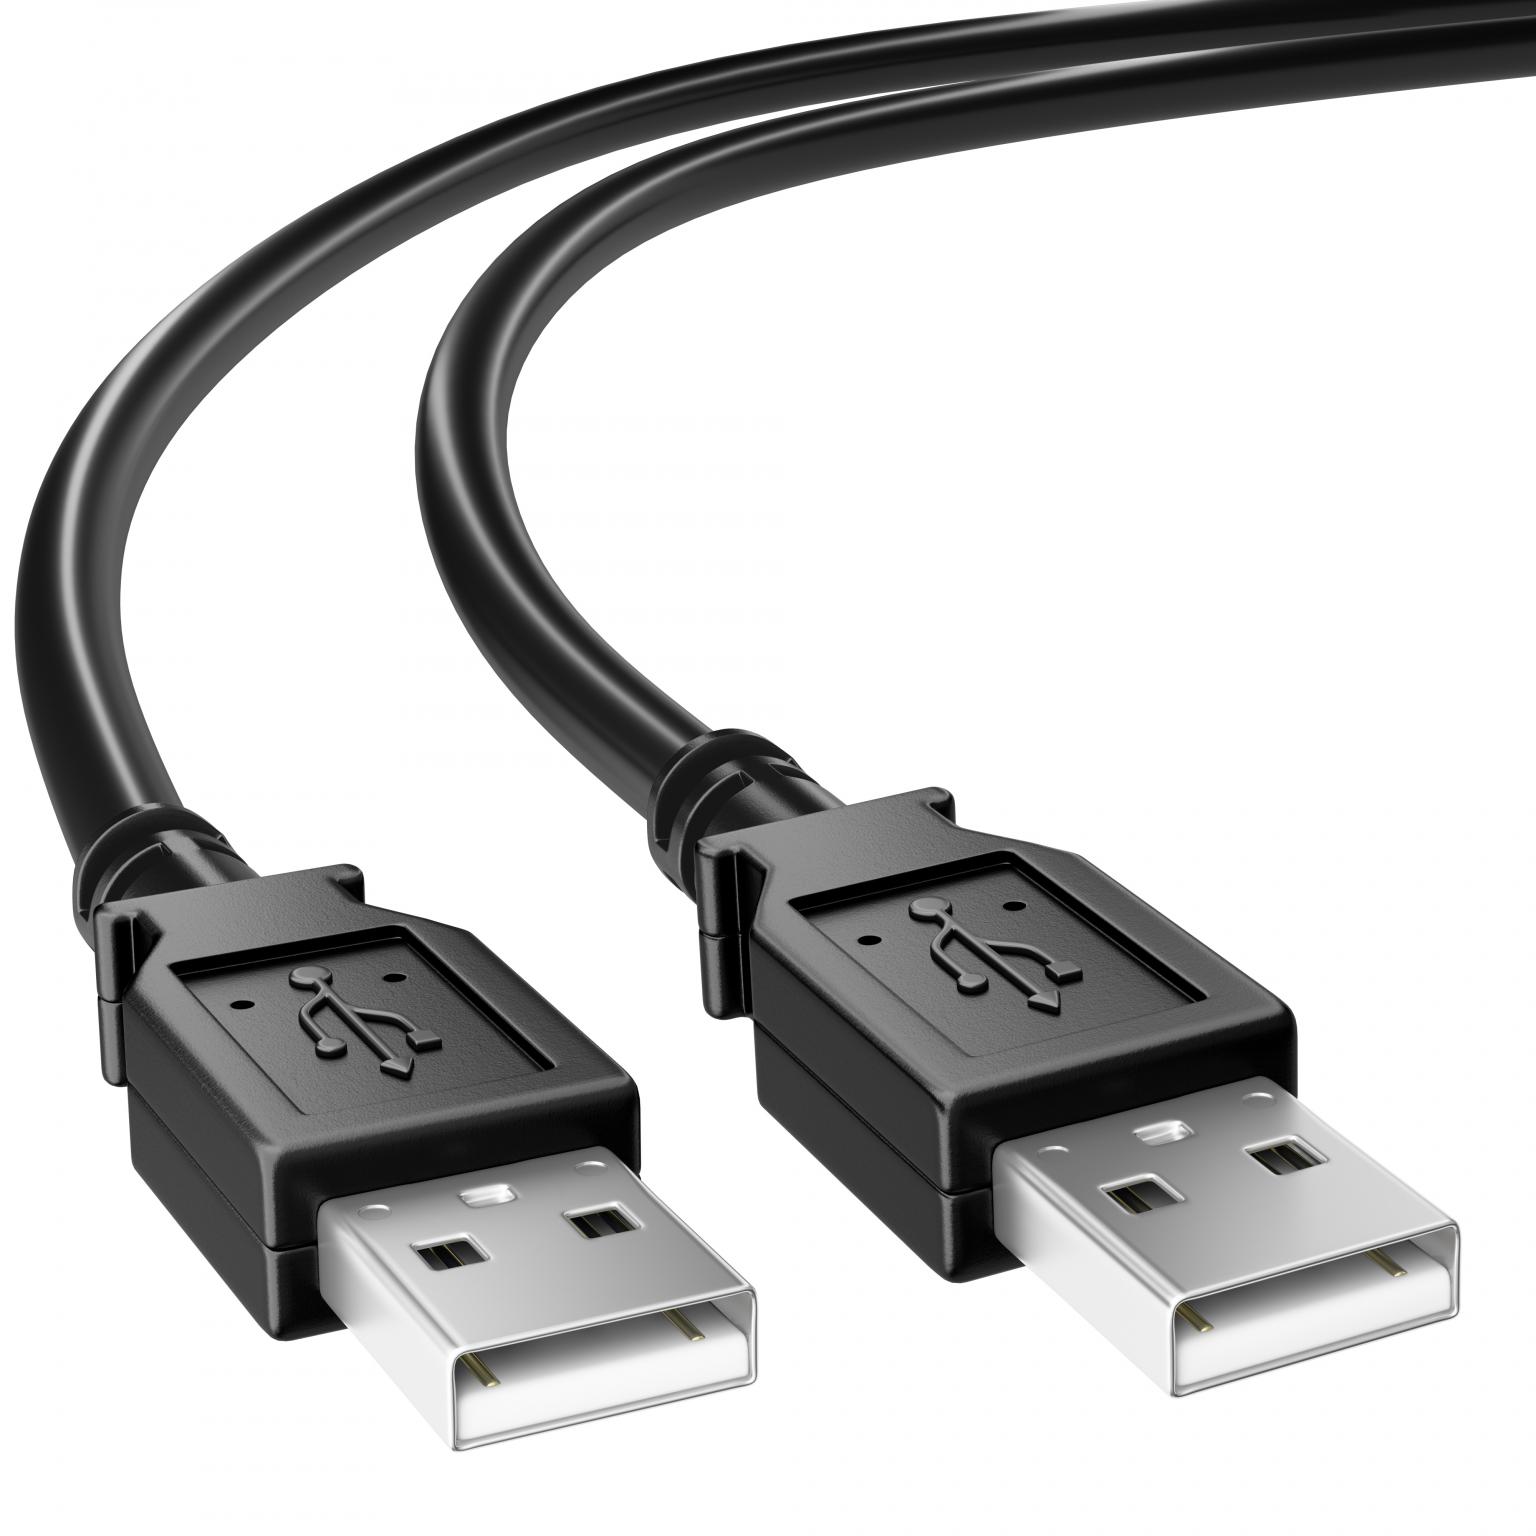 2.0 Kabel - USB 2.0 Connector 1: USB A male, Connector 2: USB A male, 5 meter.